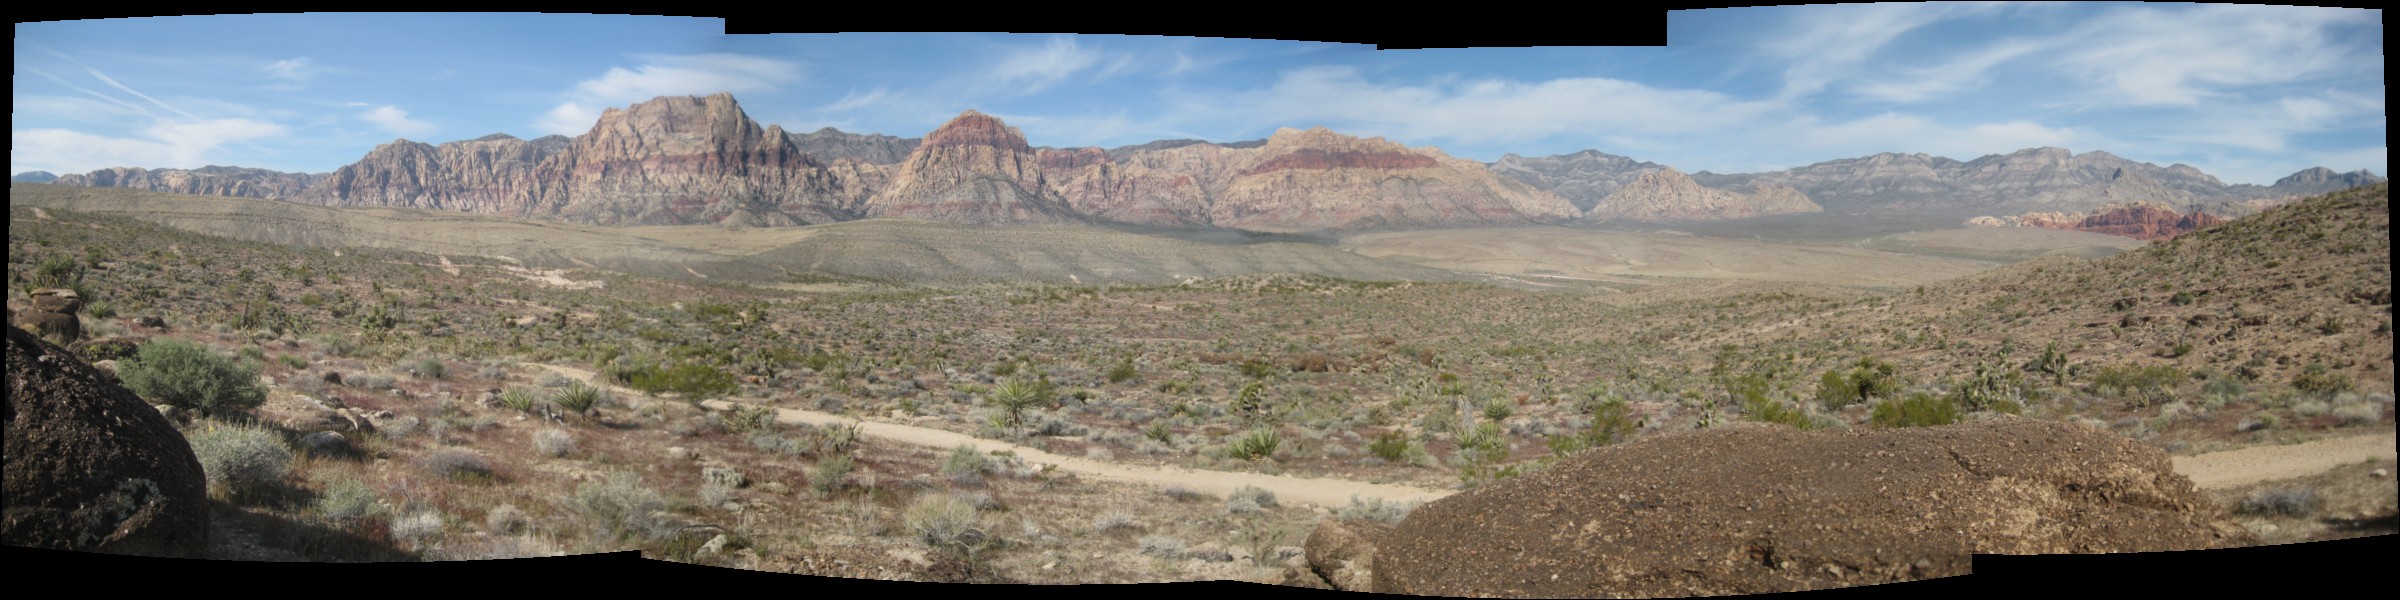 panoramic photo of the mountains near Red Rock Canyon